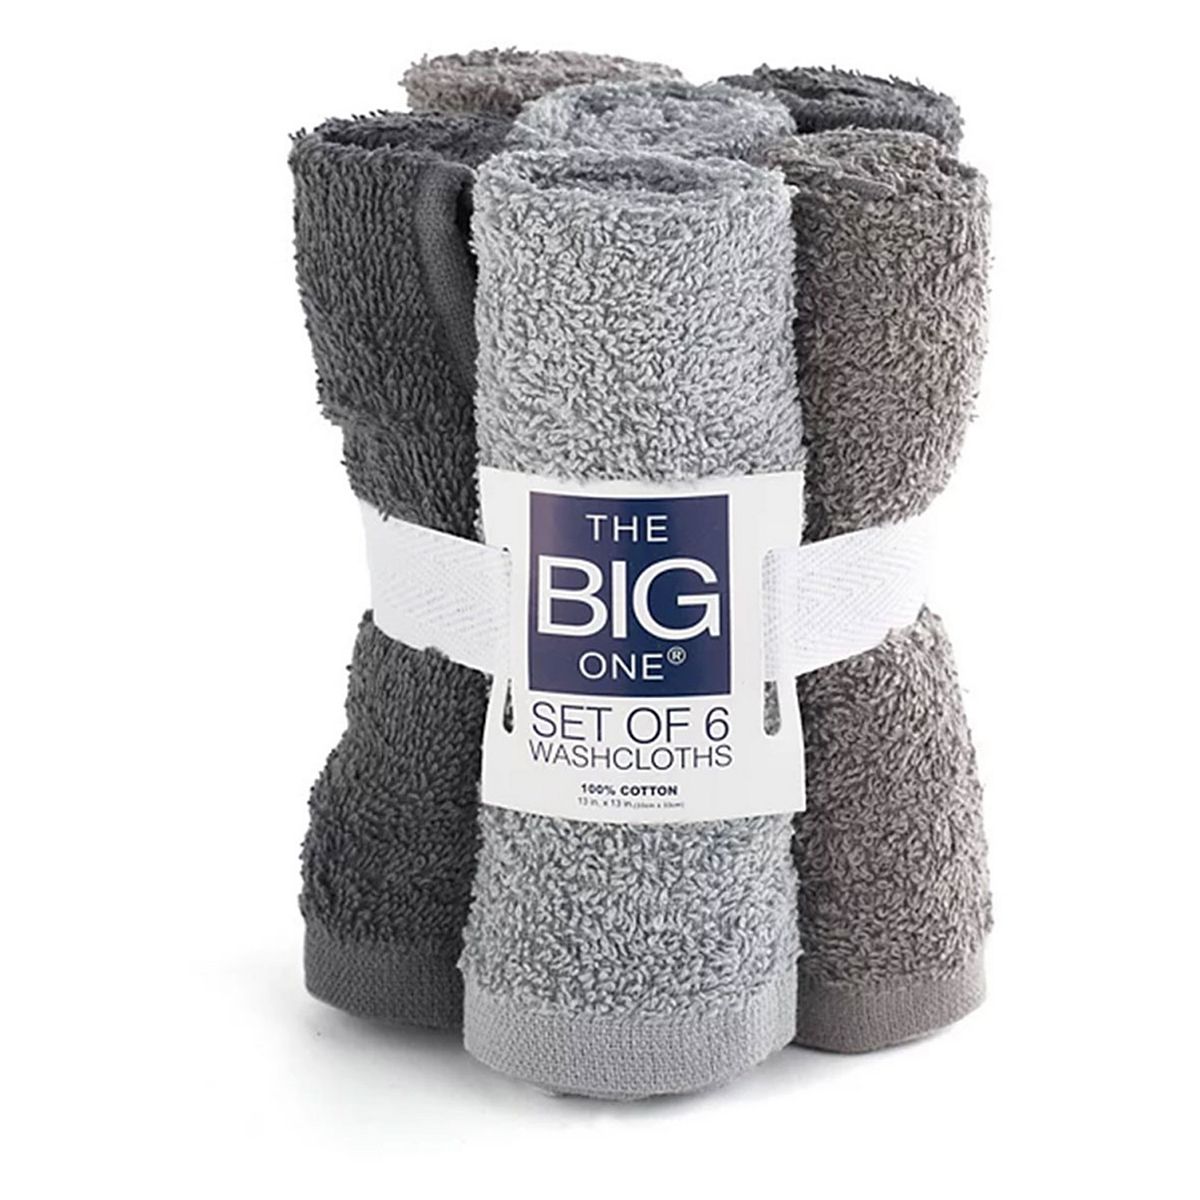 The Big One® Solid 6-pack Washcloths $3.39